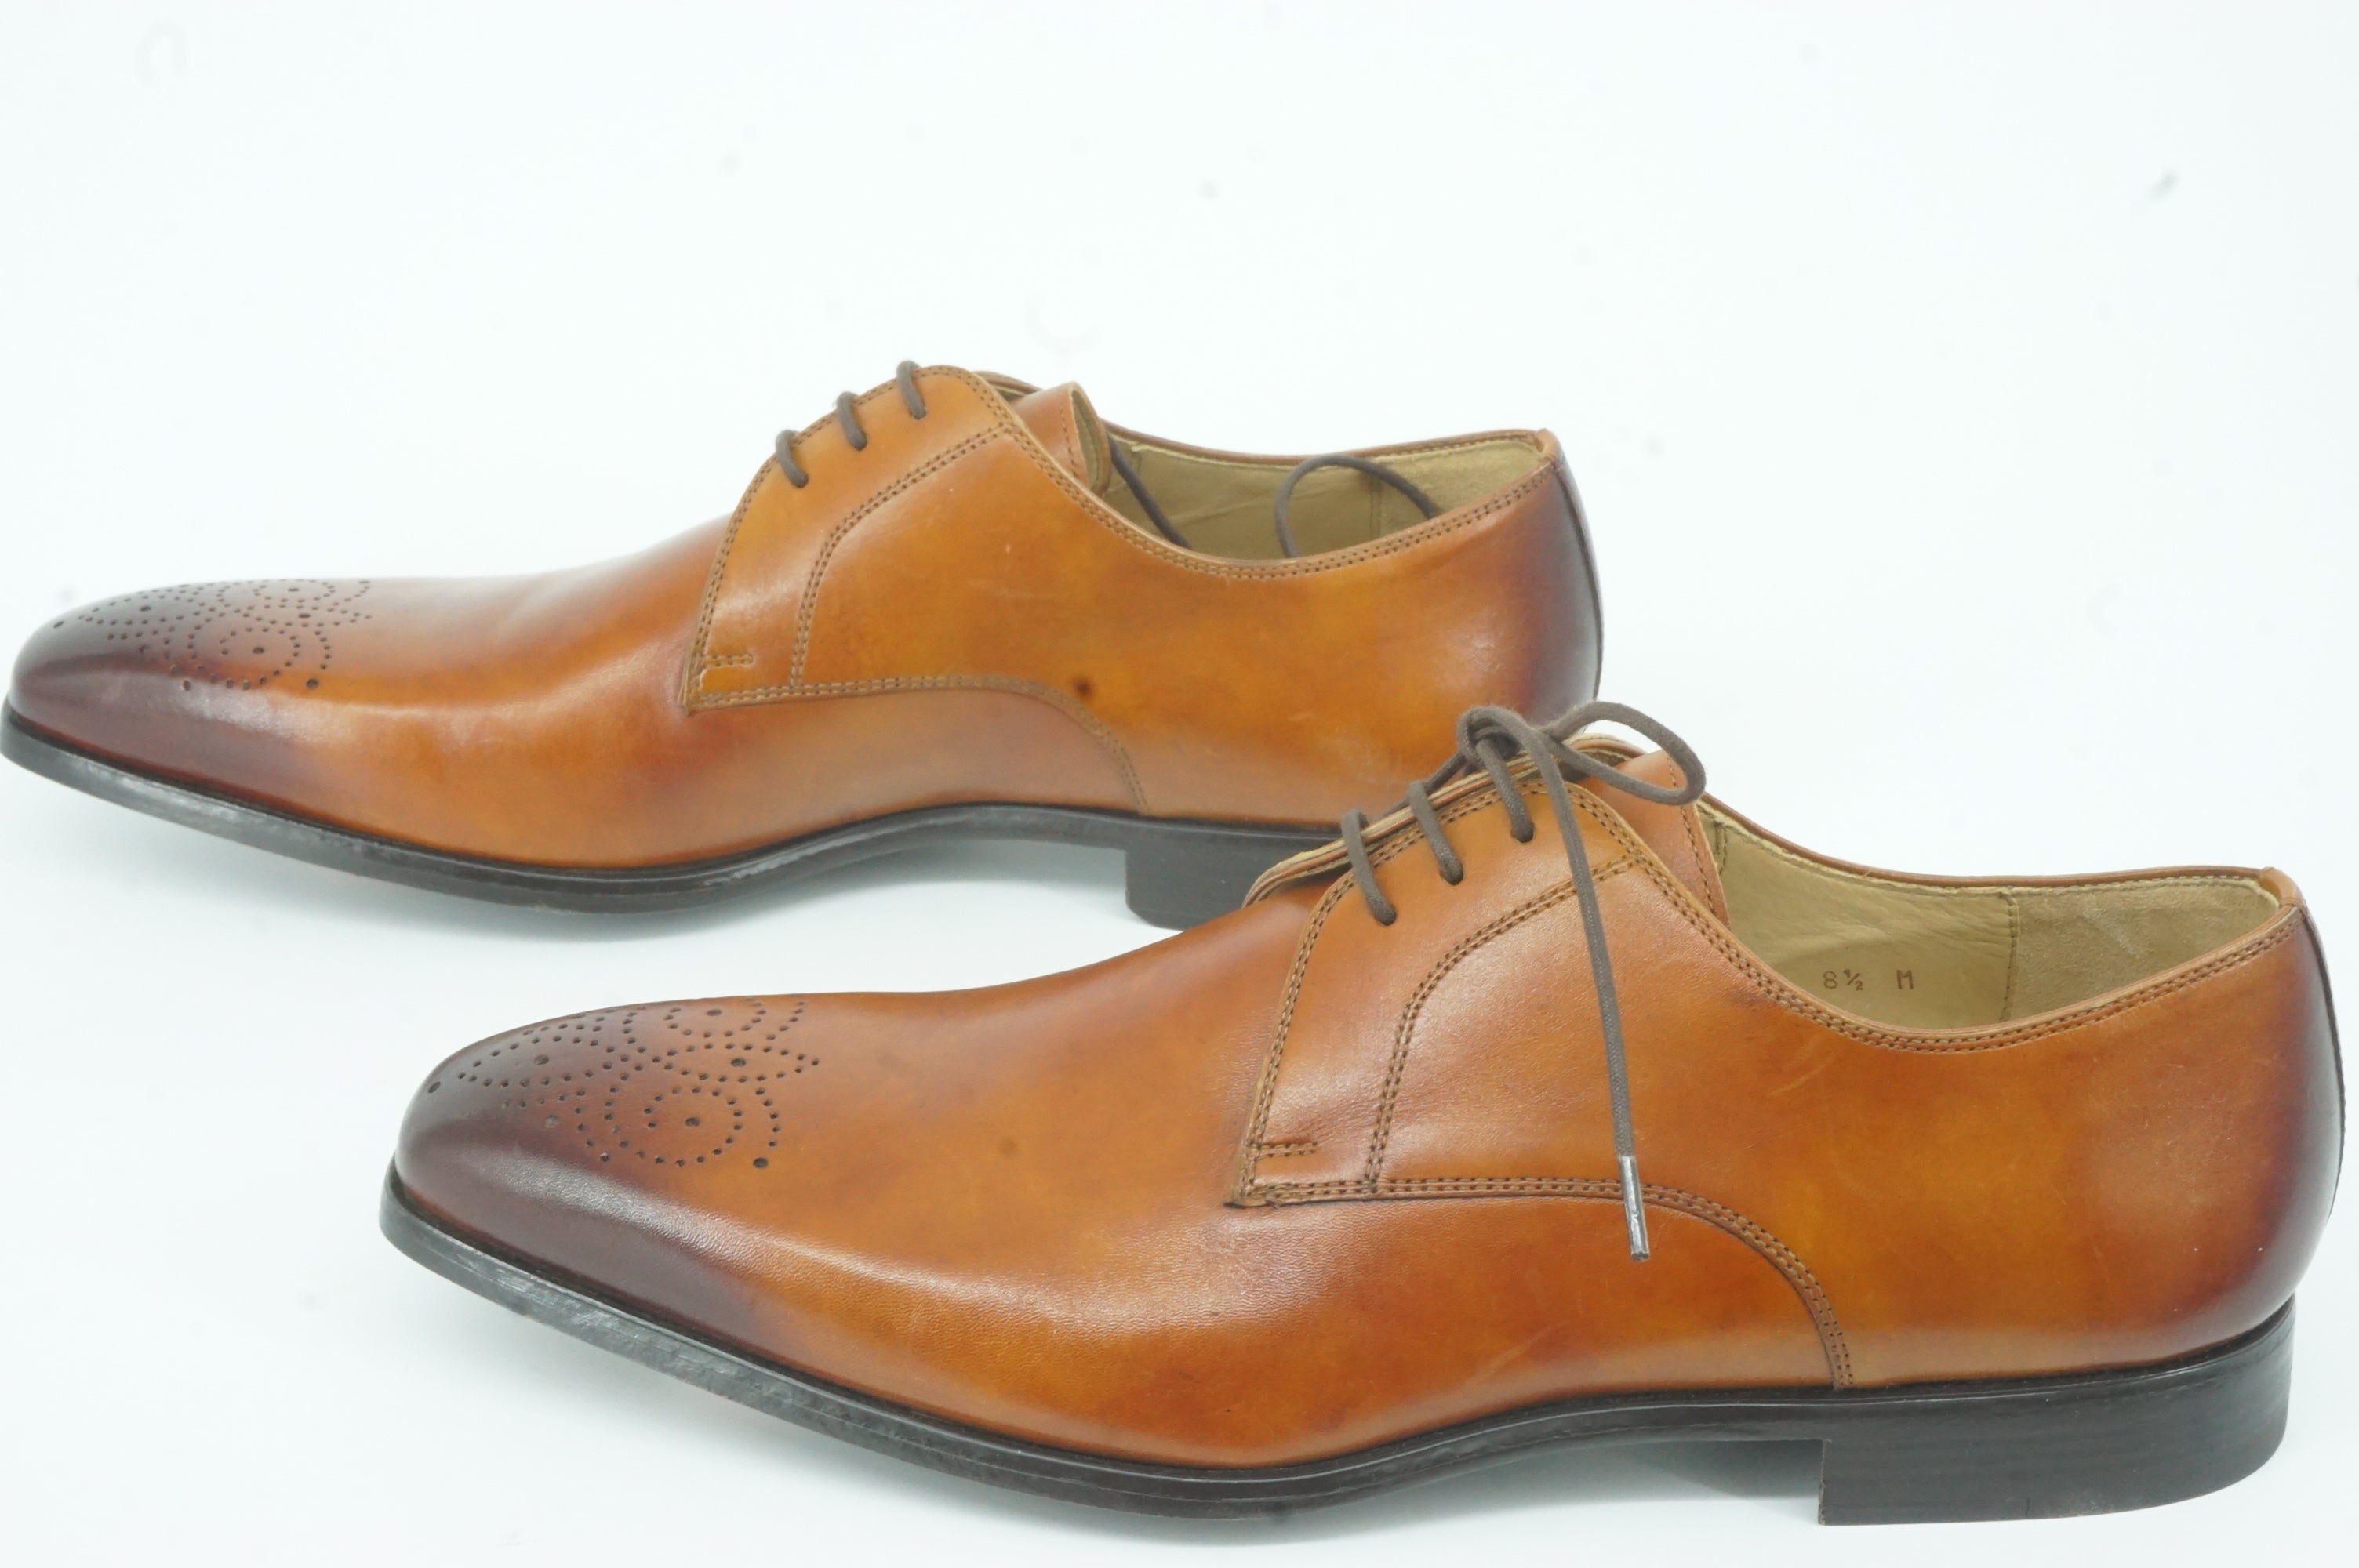 Magnanni Samuel Perforated Toe Oxford Derby Dress Shoes Size 8.5 Brown $395